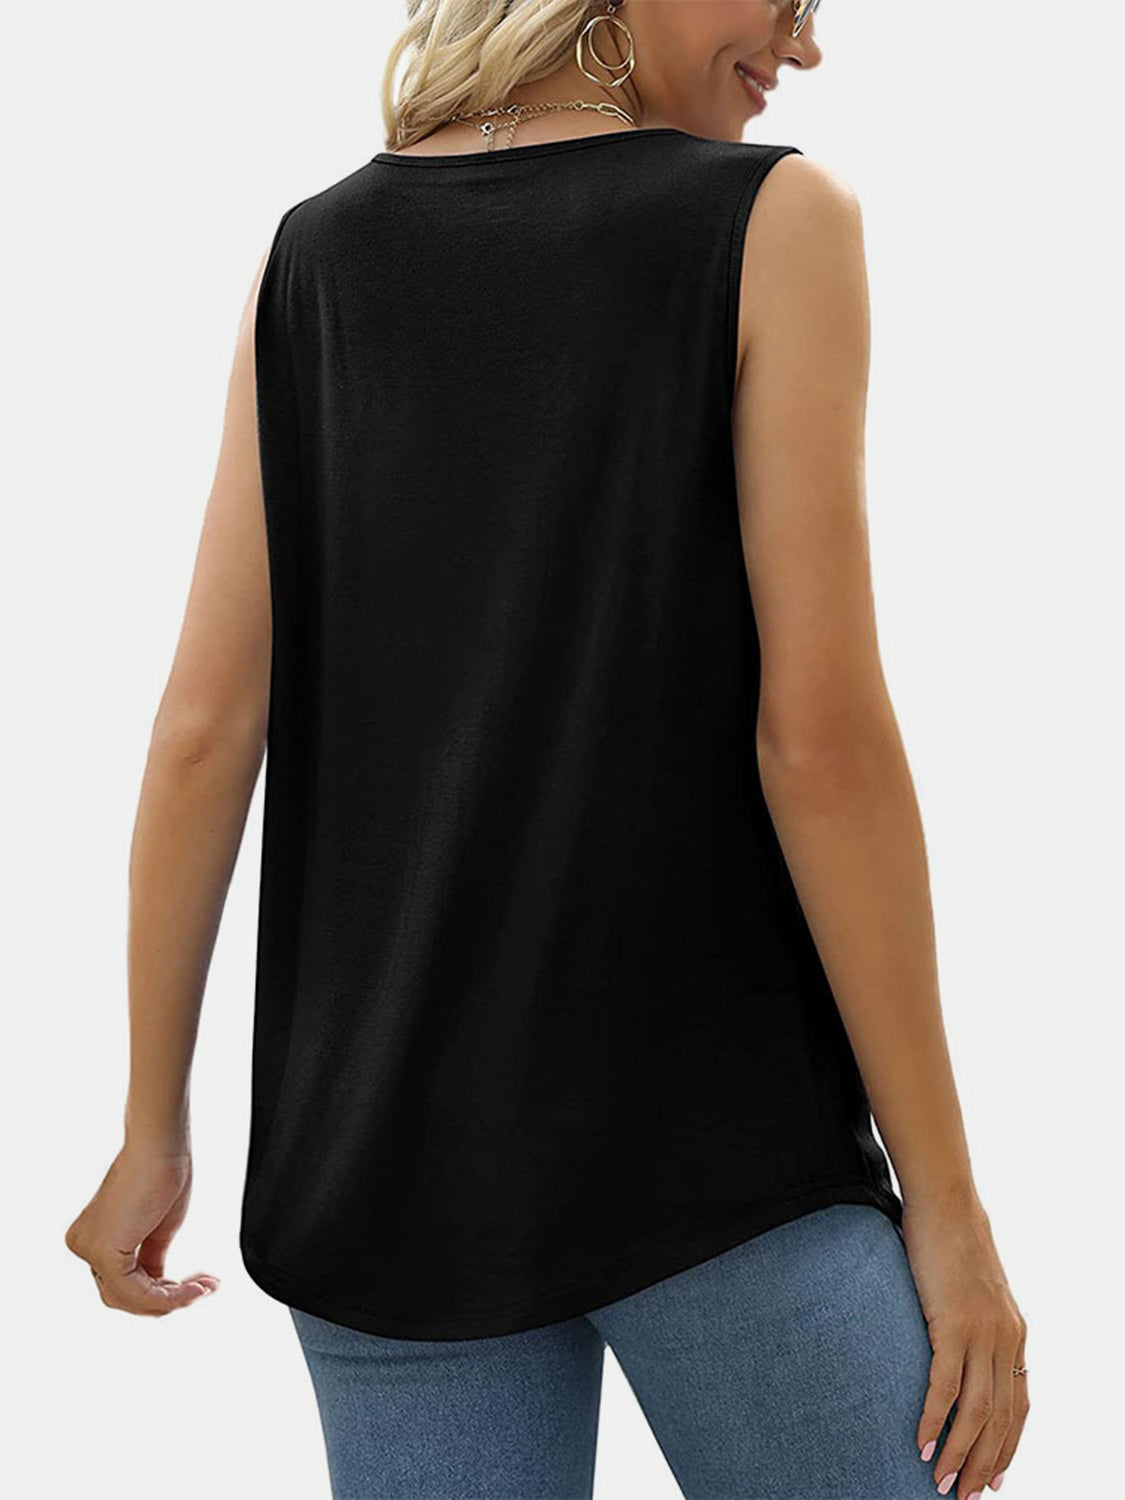 Ruched Square Neck Tank Preorder